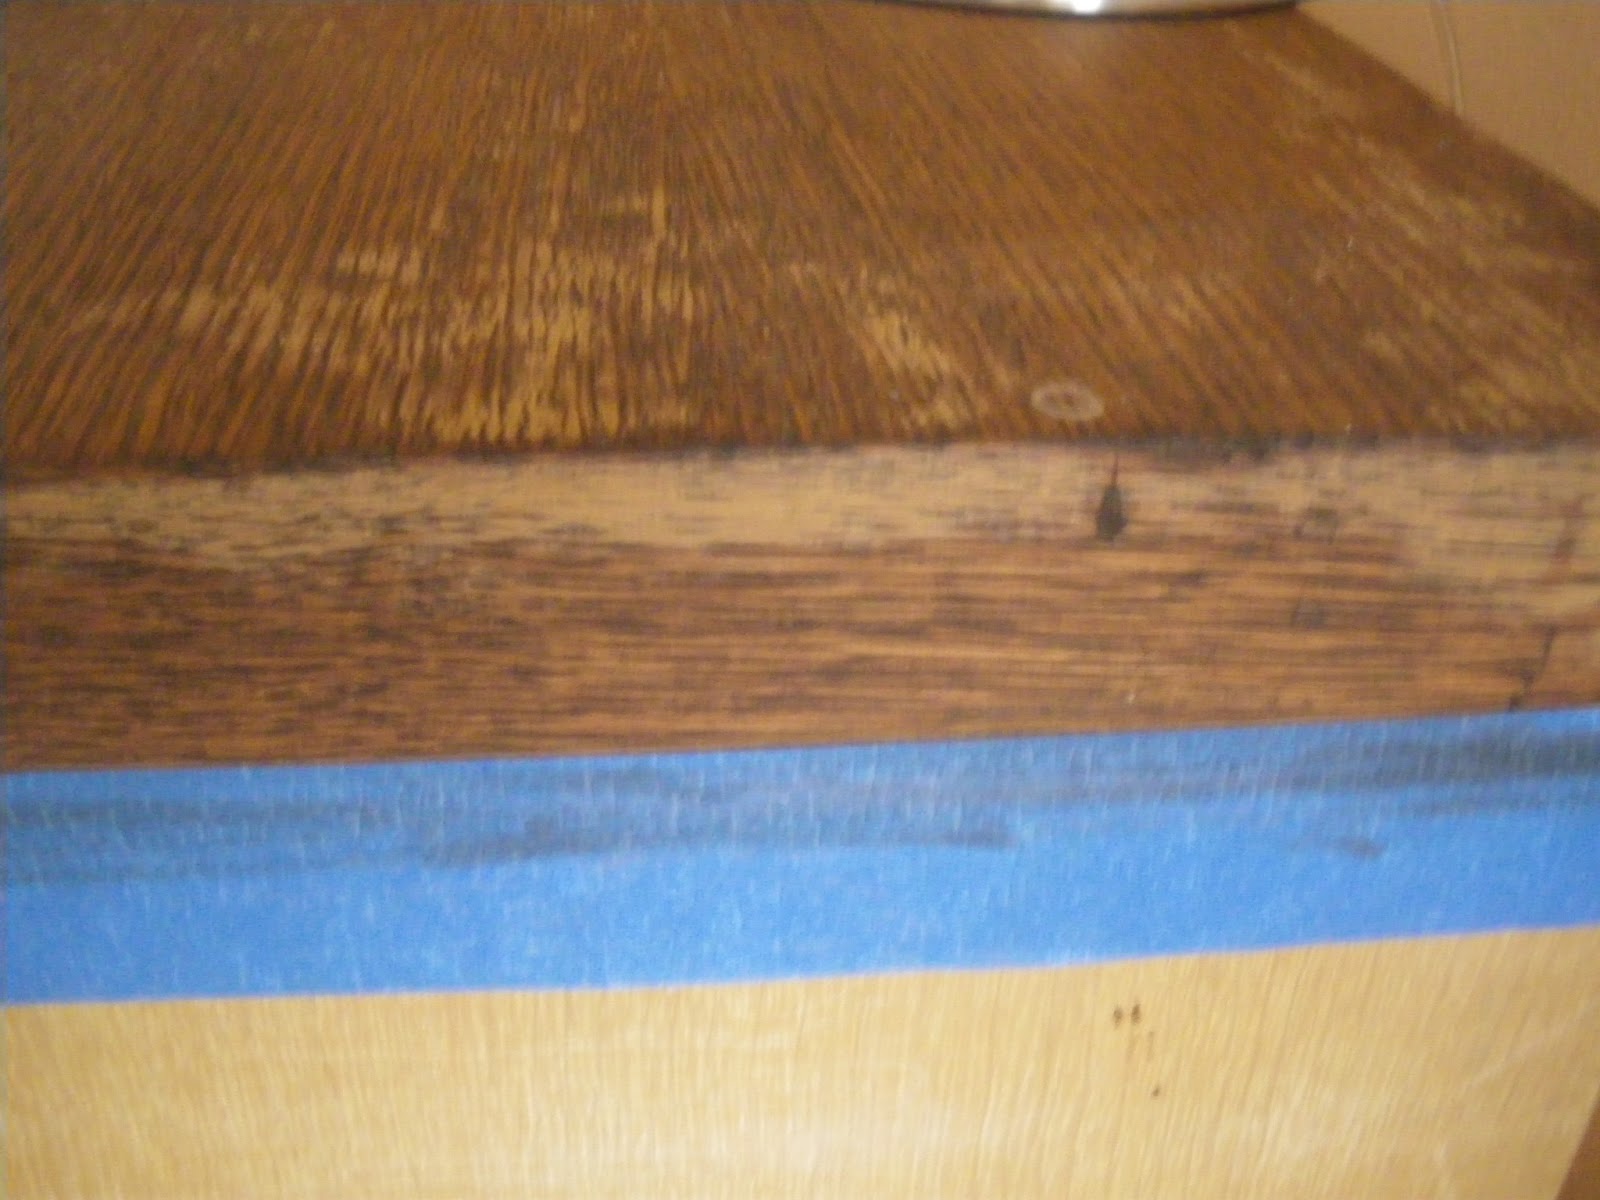 SunflowerHugs: I finally stain the top of something!  Green wood stain, Staining  wood, Refinishing furniture